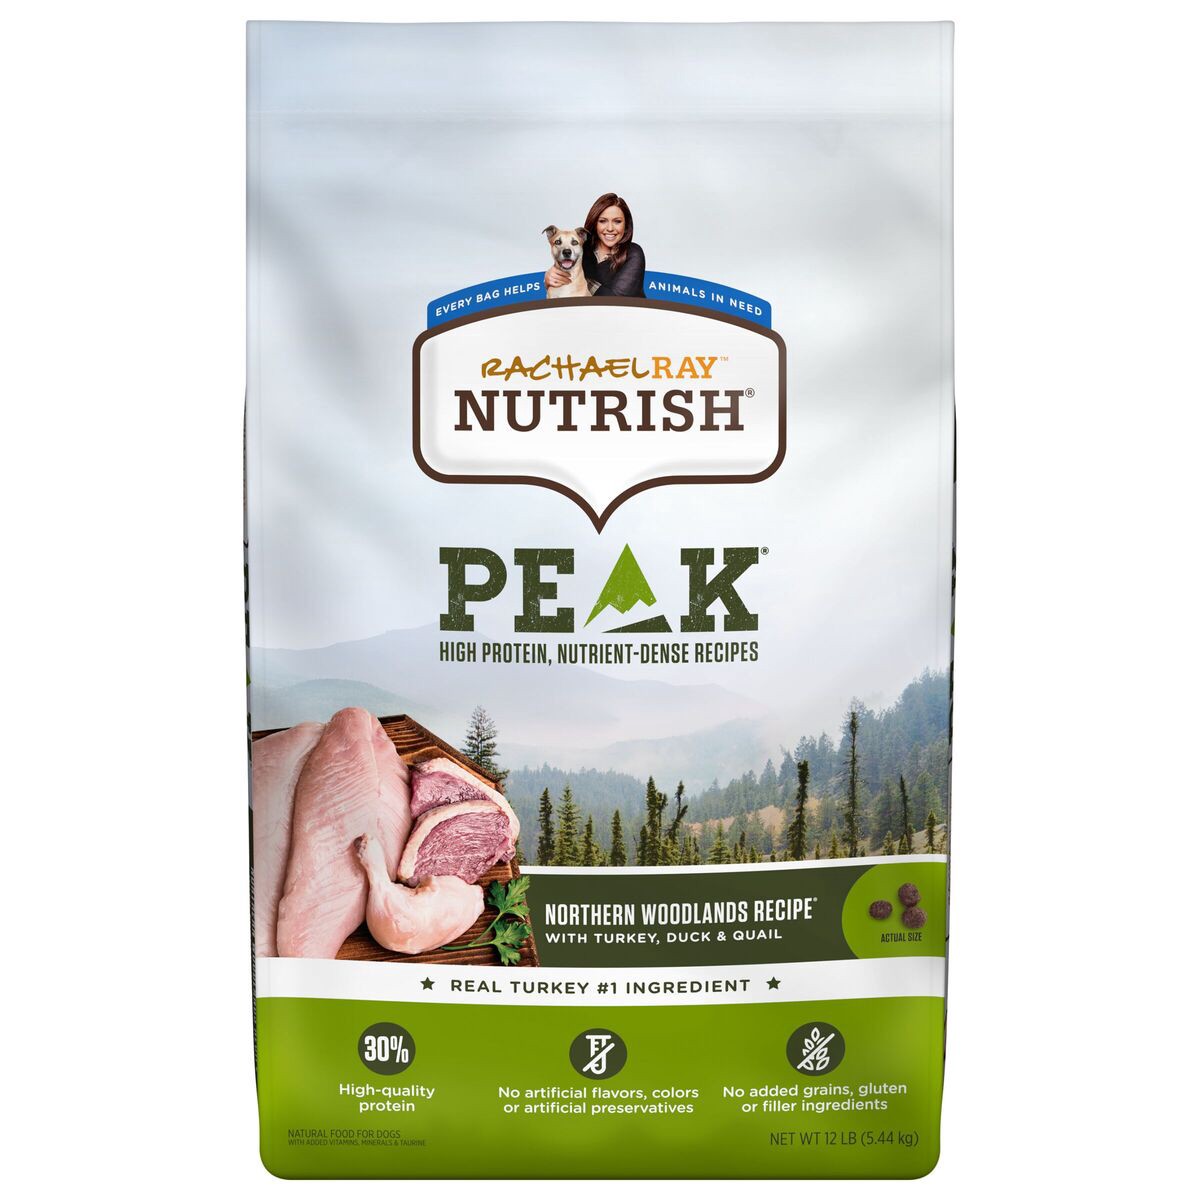 slide 1 of 8, Rachael Ray Nutrish Peak Northern Woodlands Recipe With Turkey, Duck & Quail, Dry Dog Food, 12 lb Bag (Packaging May Vary), 12 lb